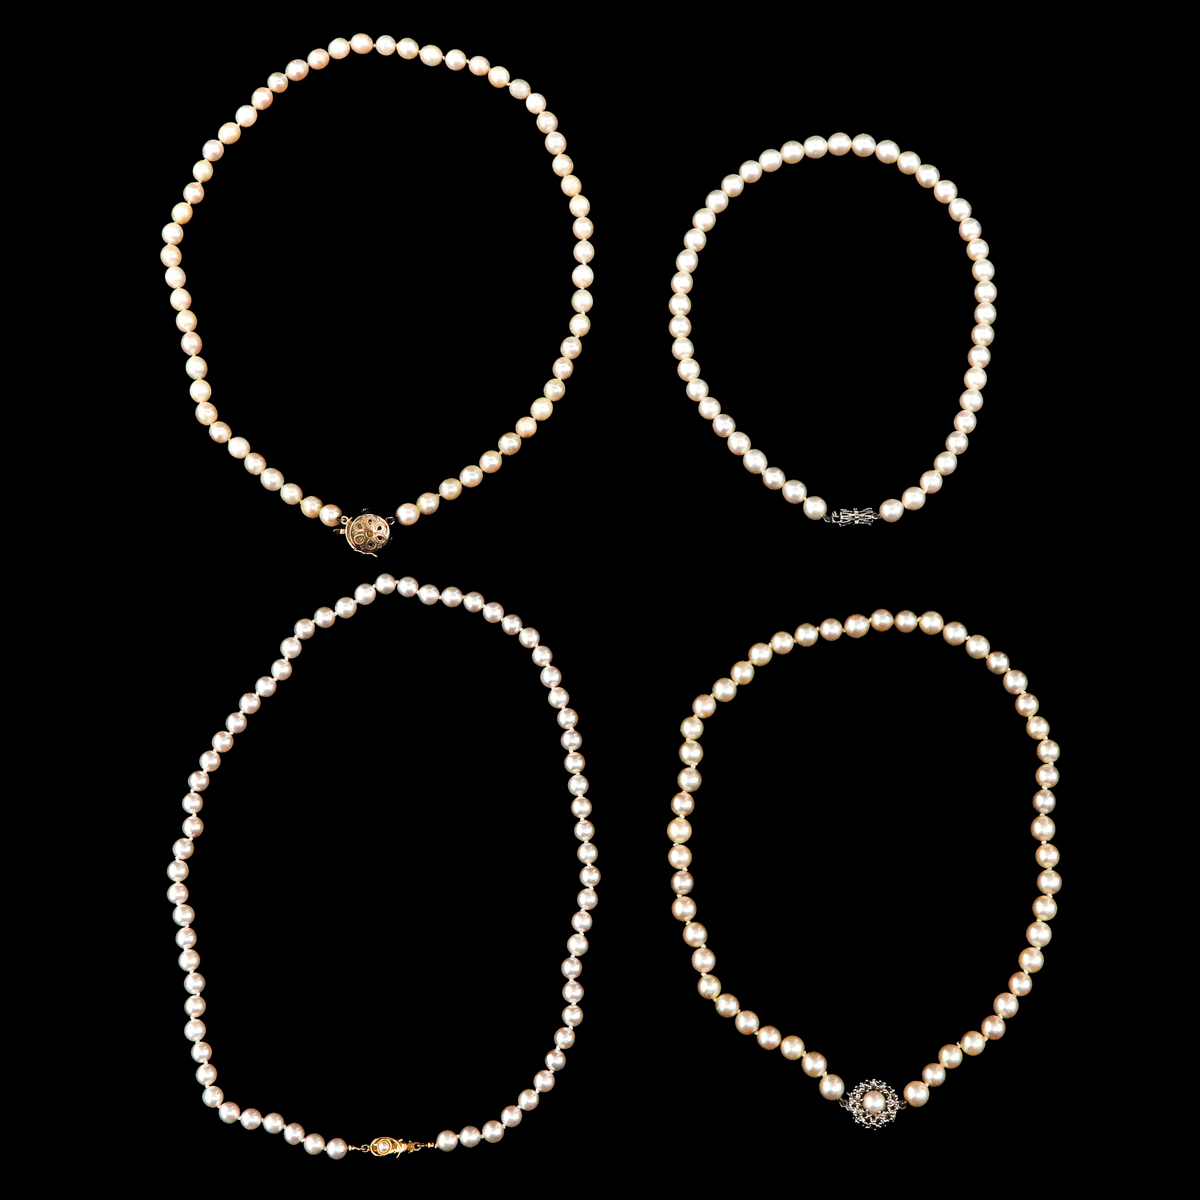 A Collection of 4 Pearl Necklaces - Image 2 of 10